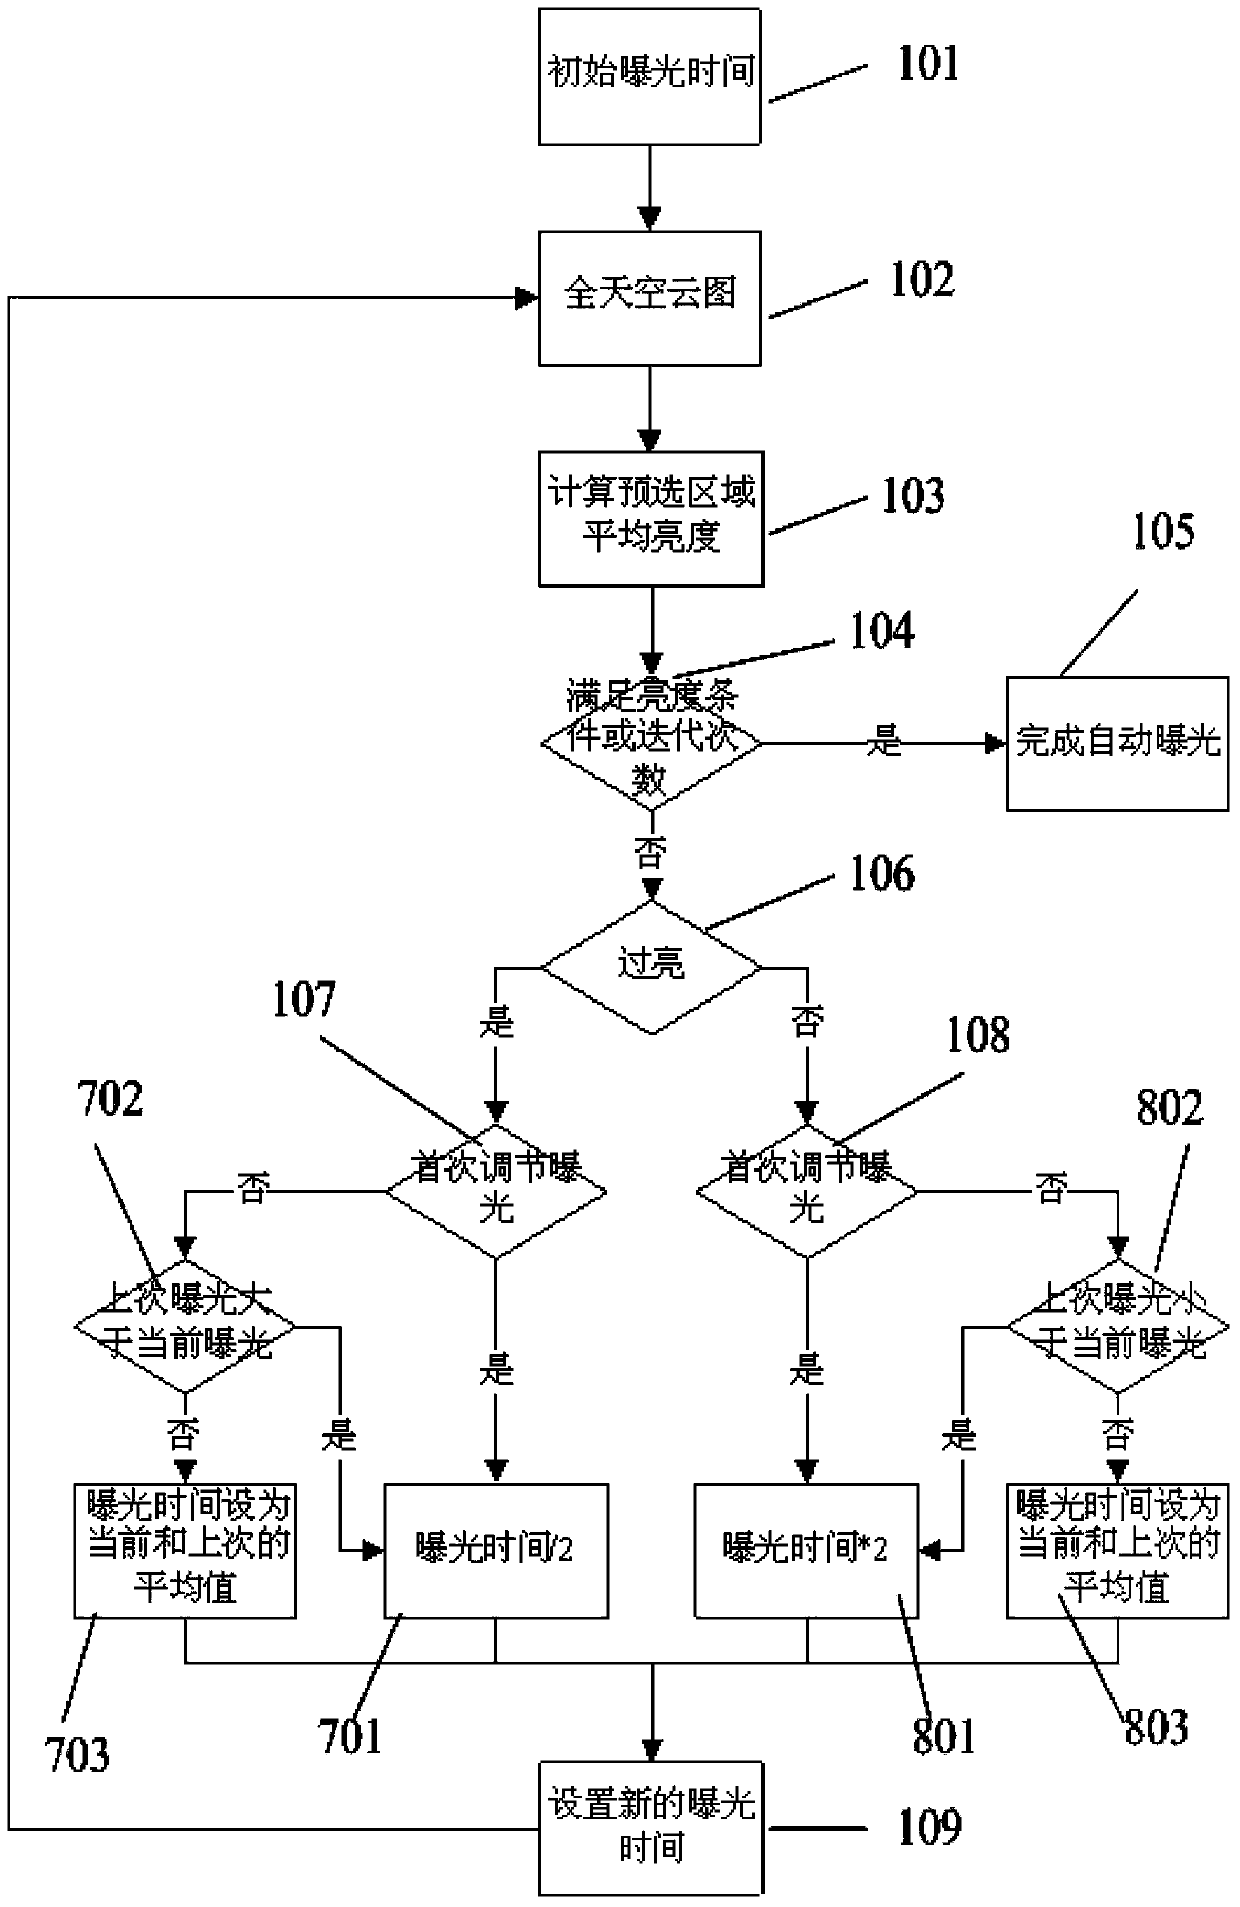 Cloud and aerial total cloud amount detection method and system